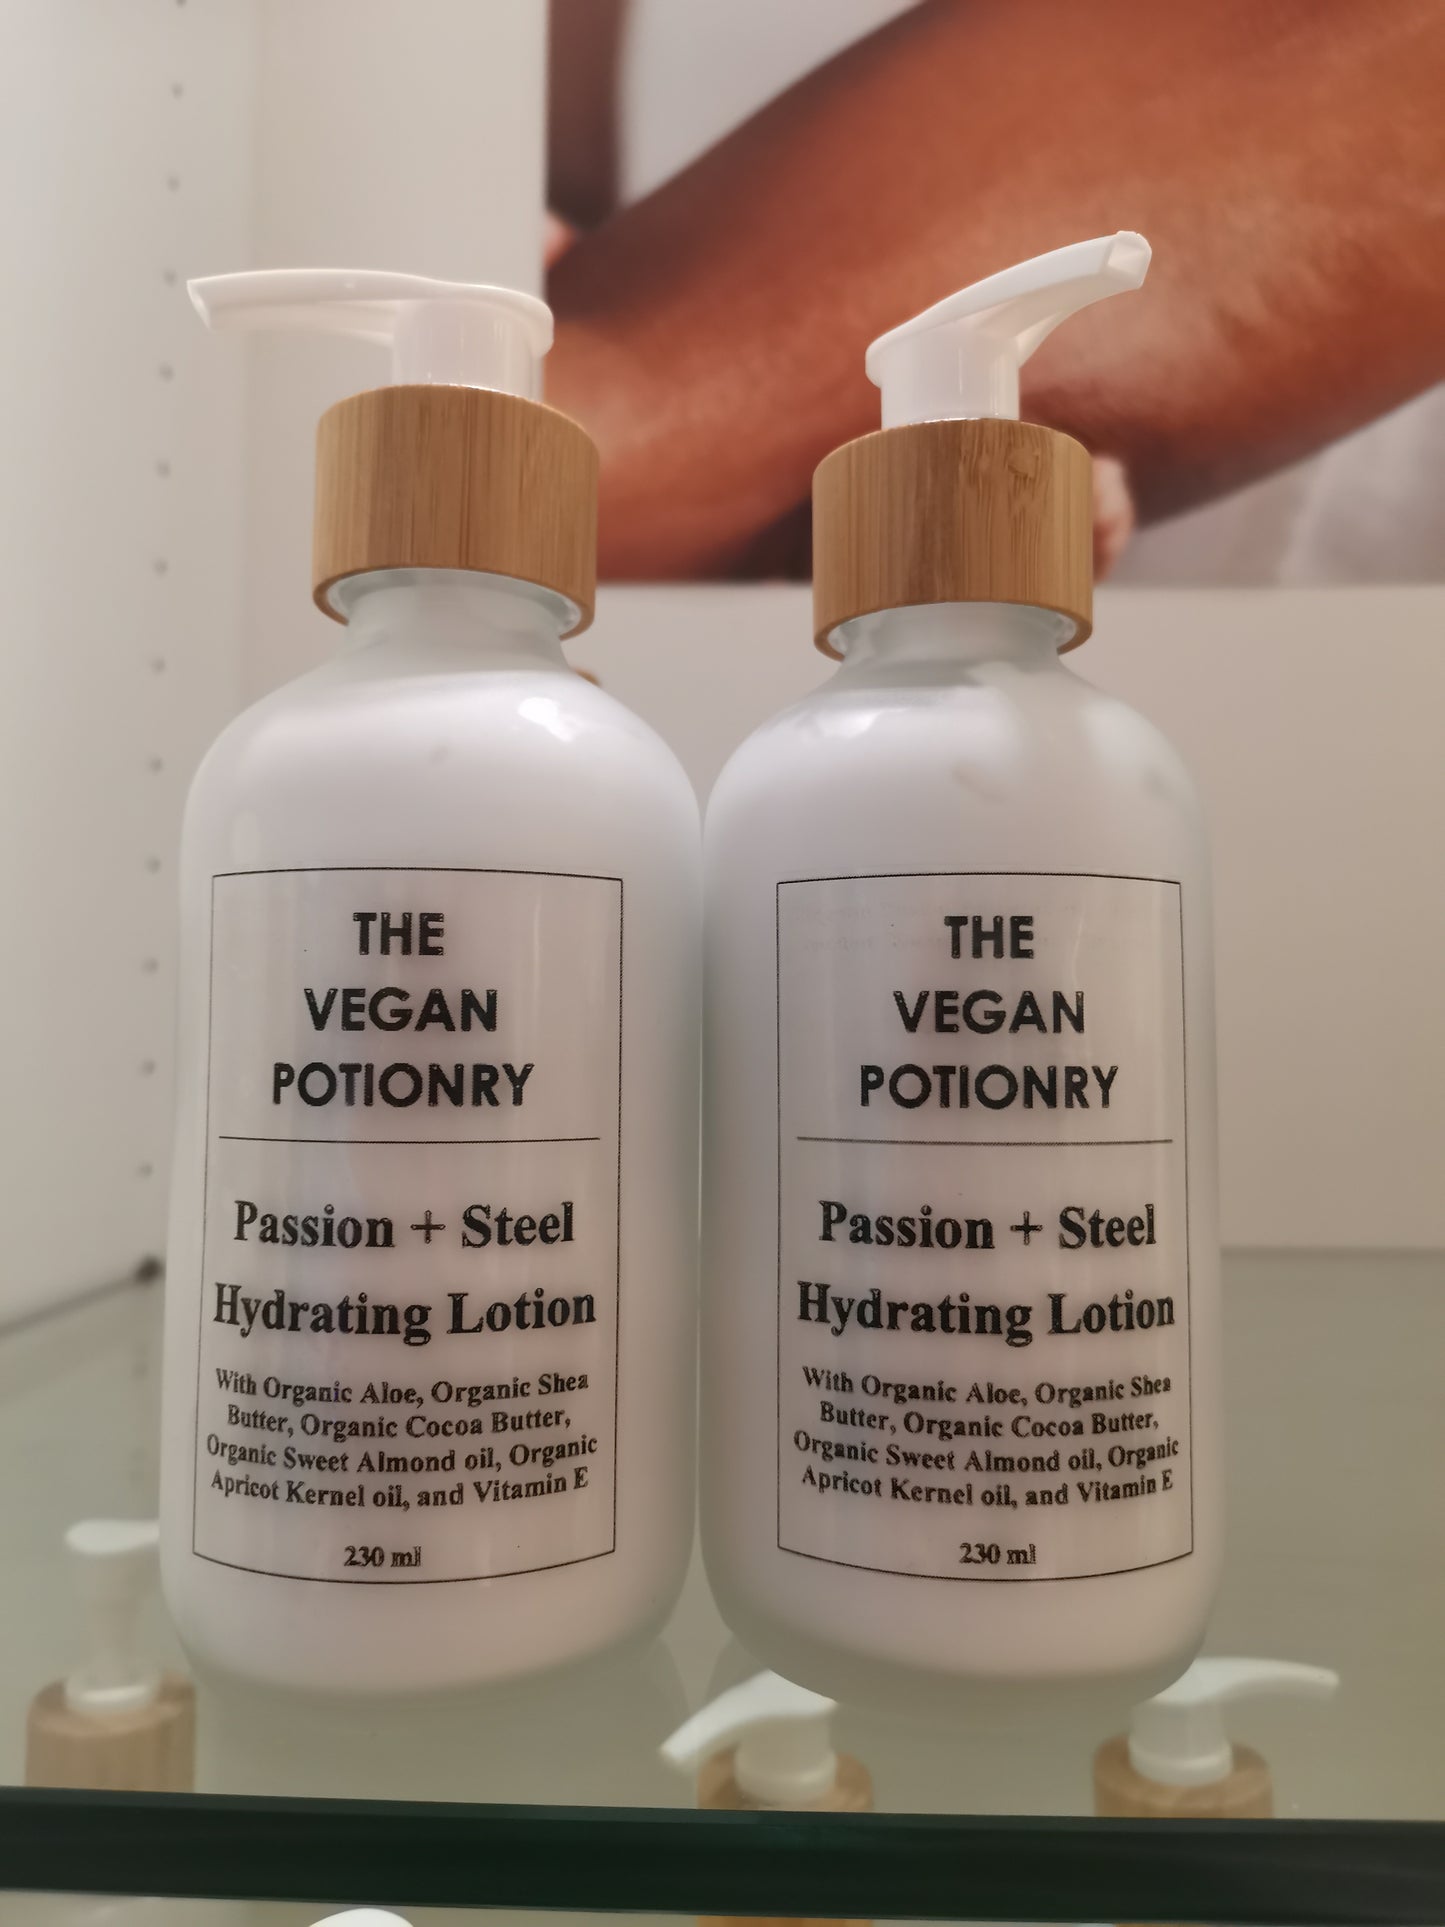 Passion + Steel Hydrating Lotion | The Vegan Potionry